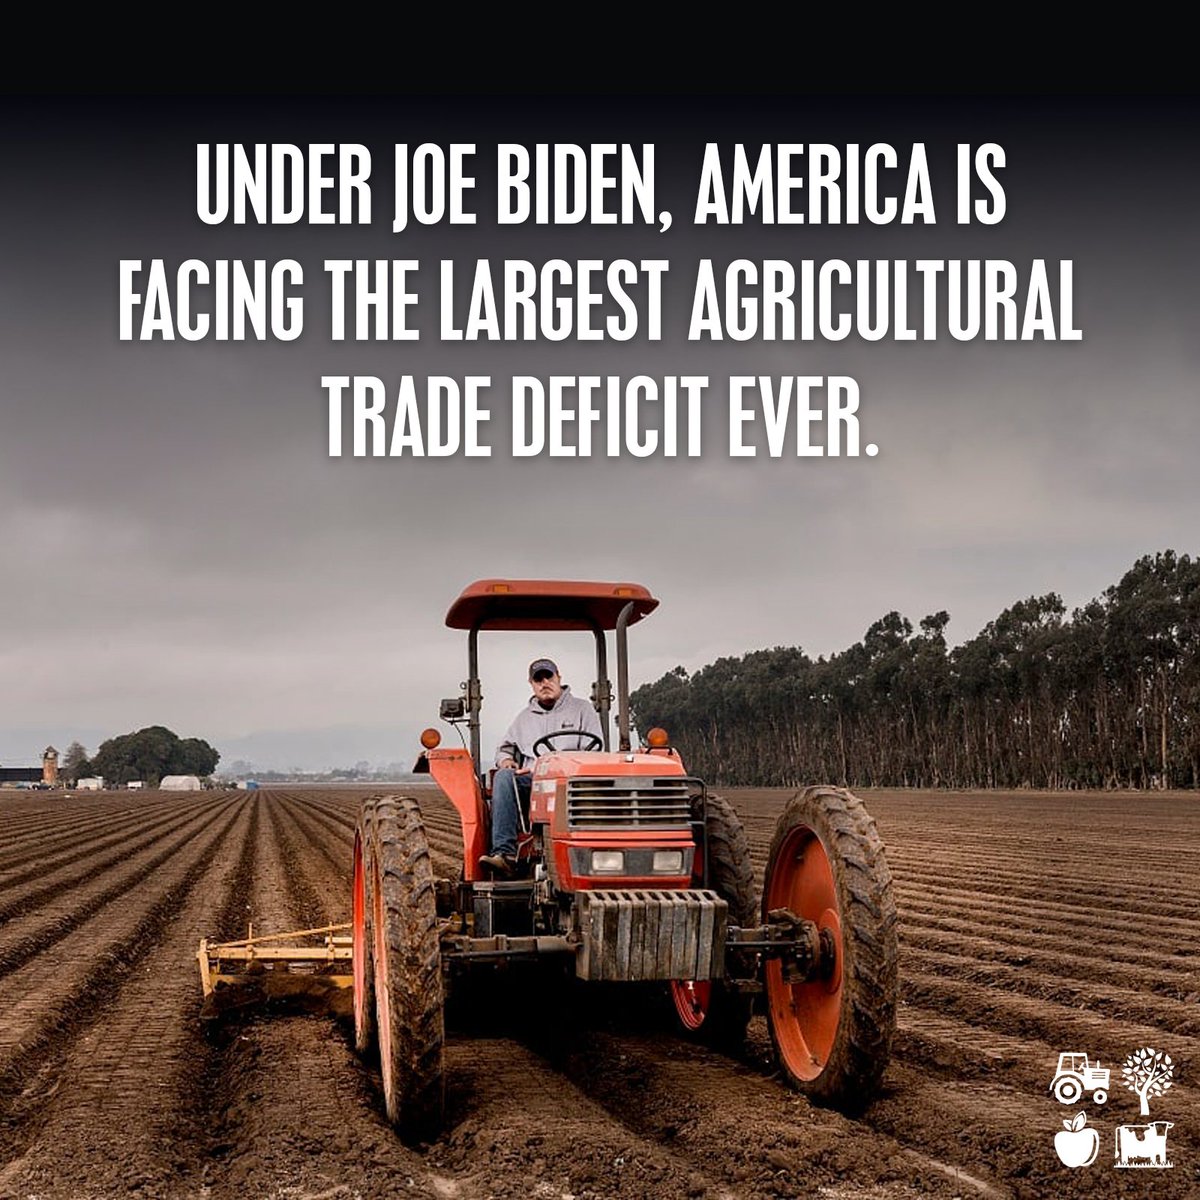 In a new #FarmBill we can course-correct the failed trade policies of the Biden administration and get our farm economy back on track.